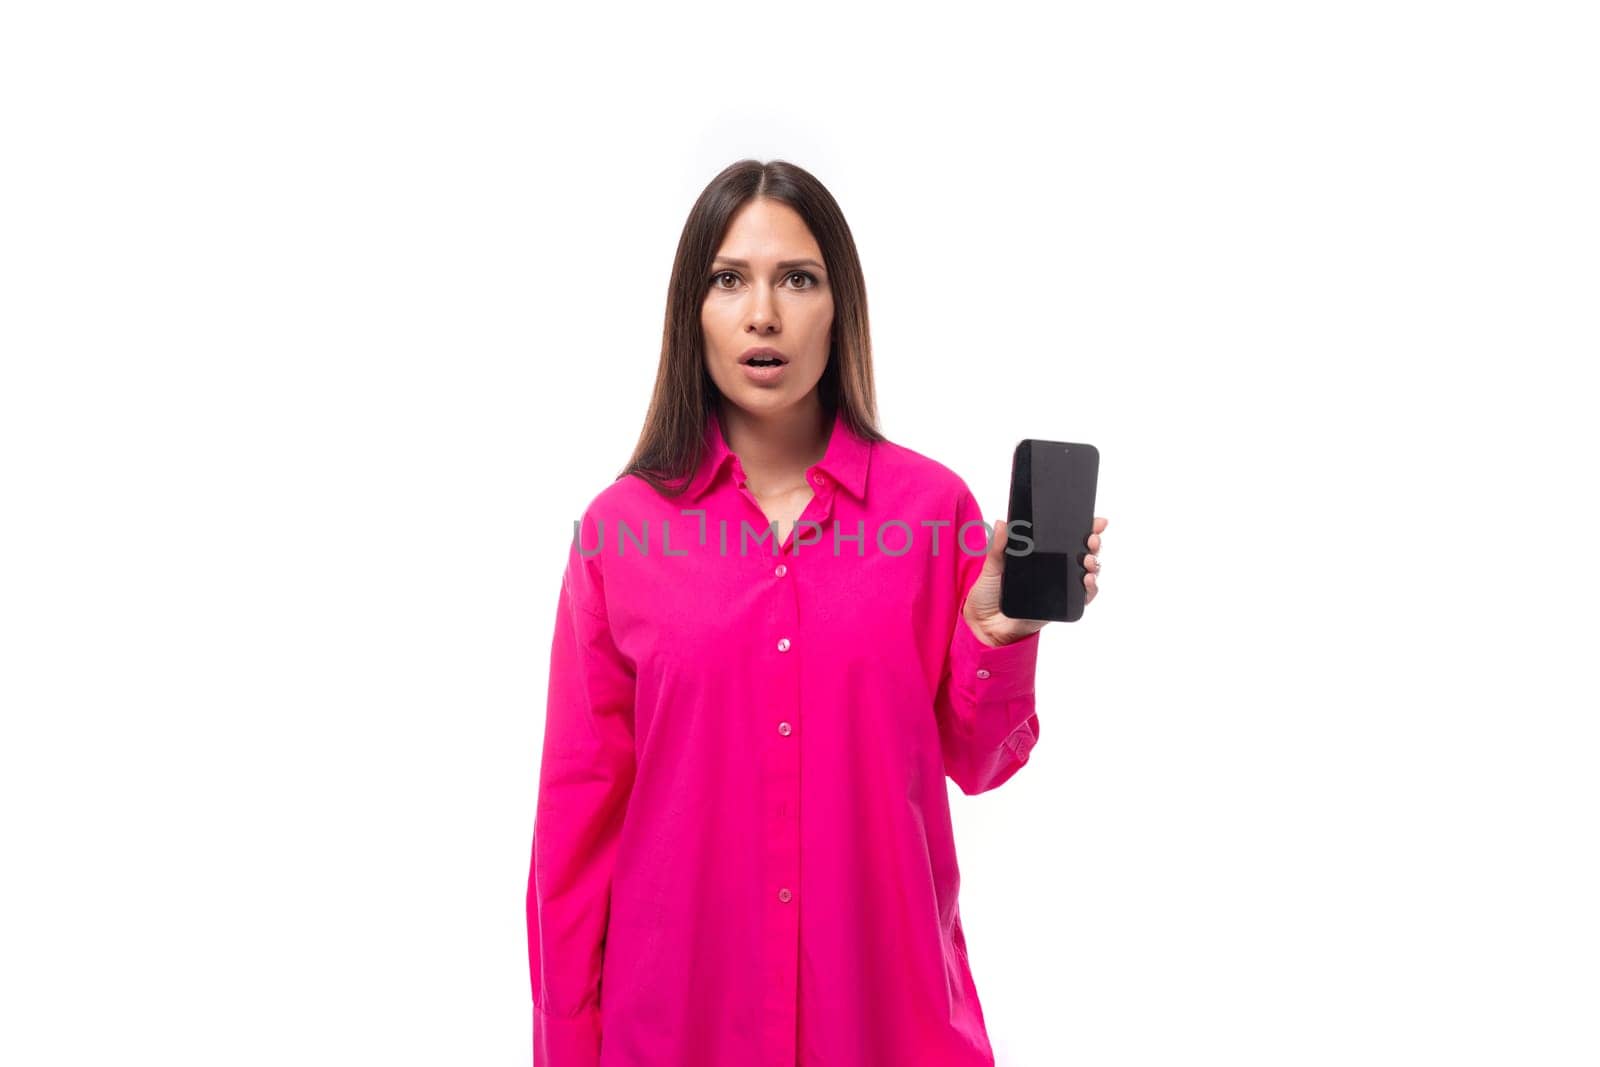 stylish caucasian woman with black straight hair dressed in a crimson shirt shows the smartphone screen in surprise.